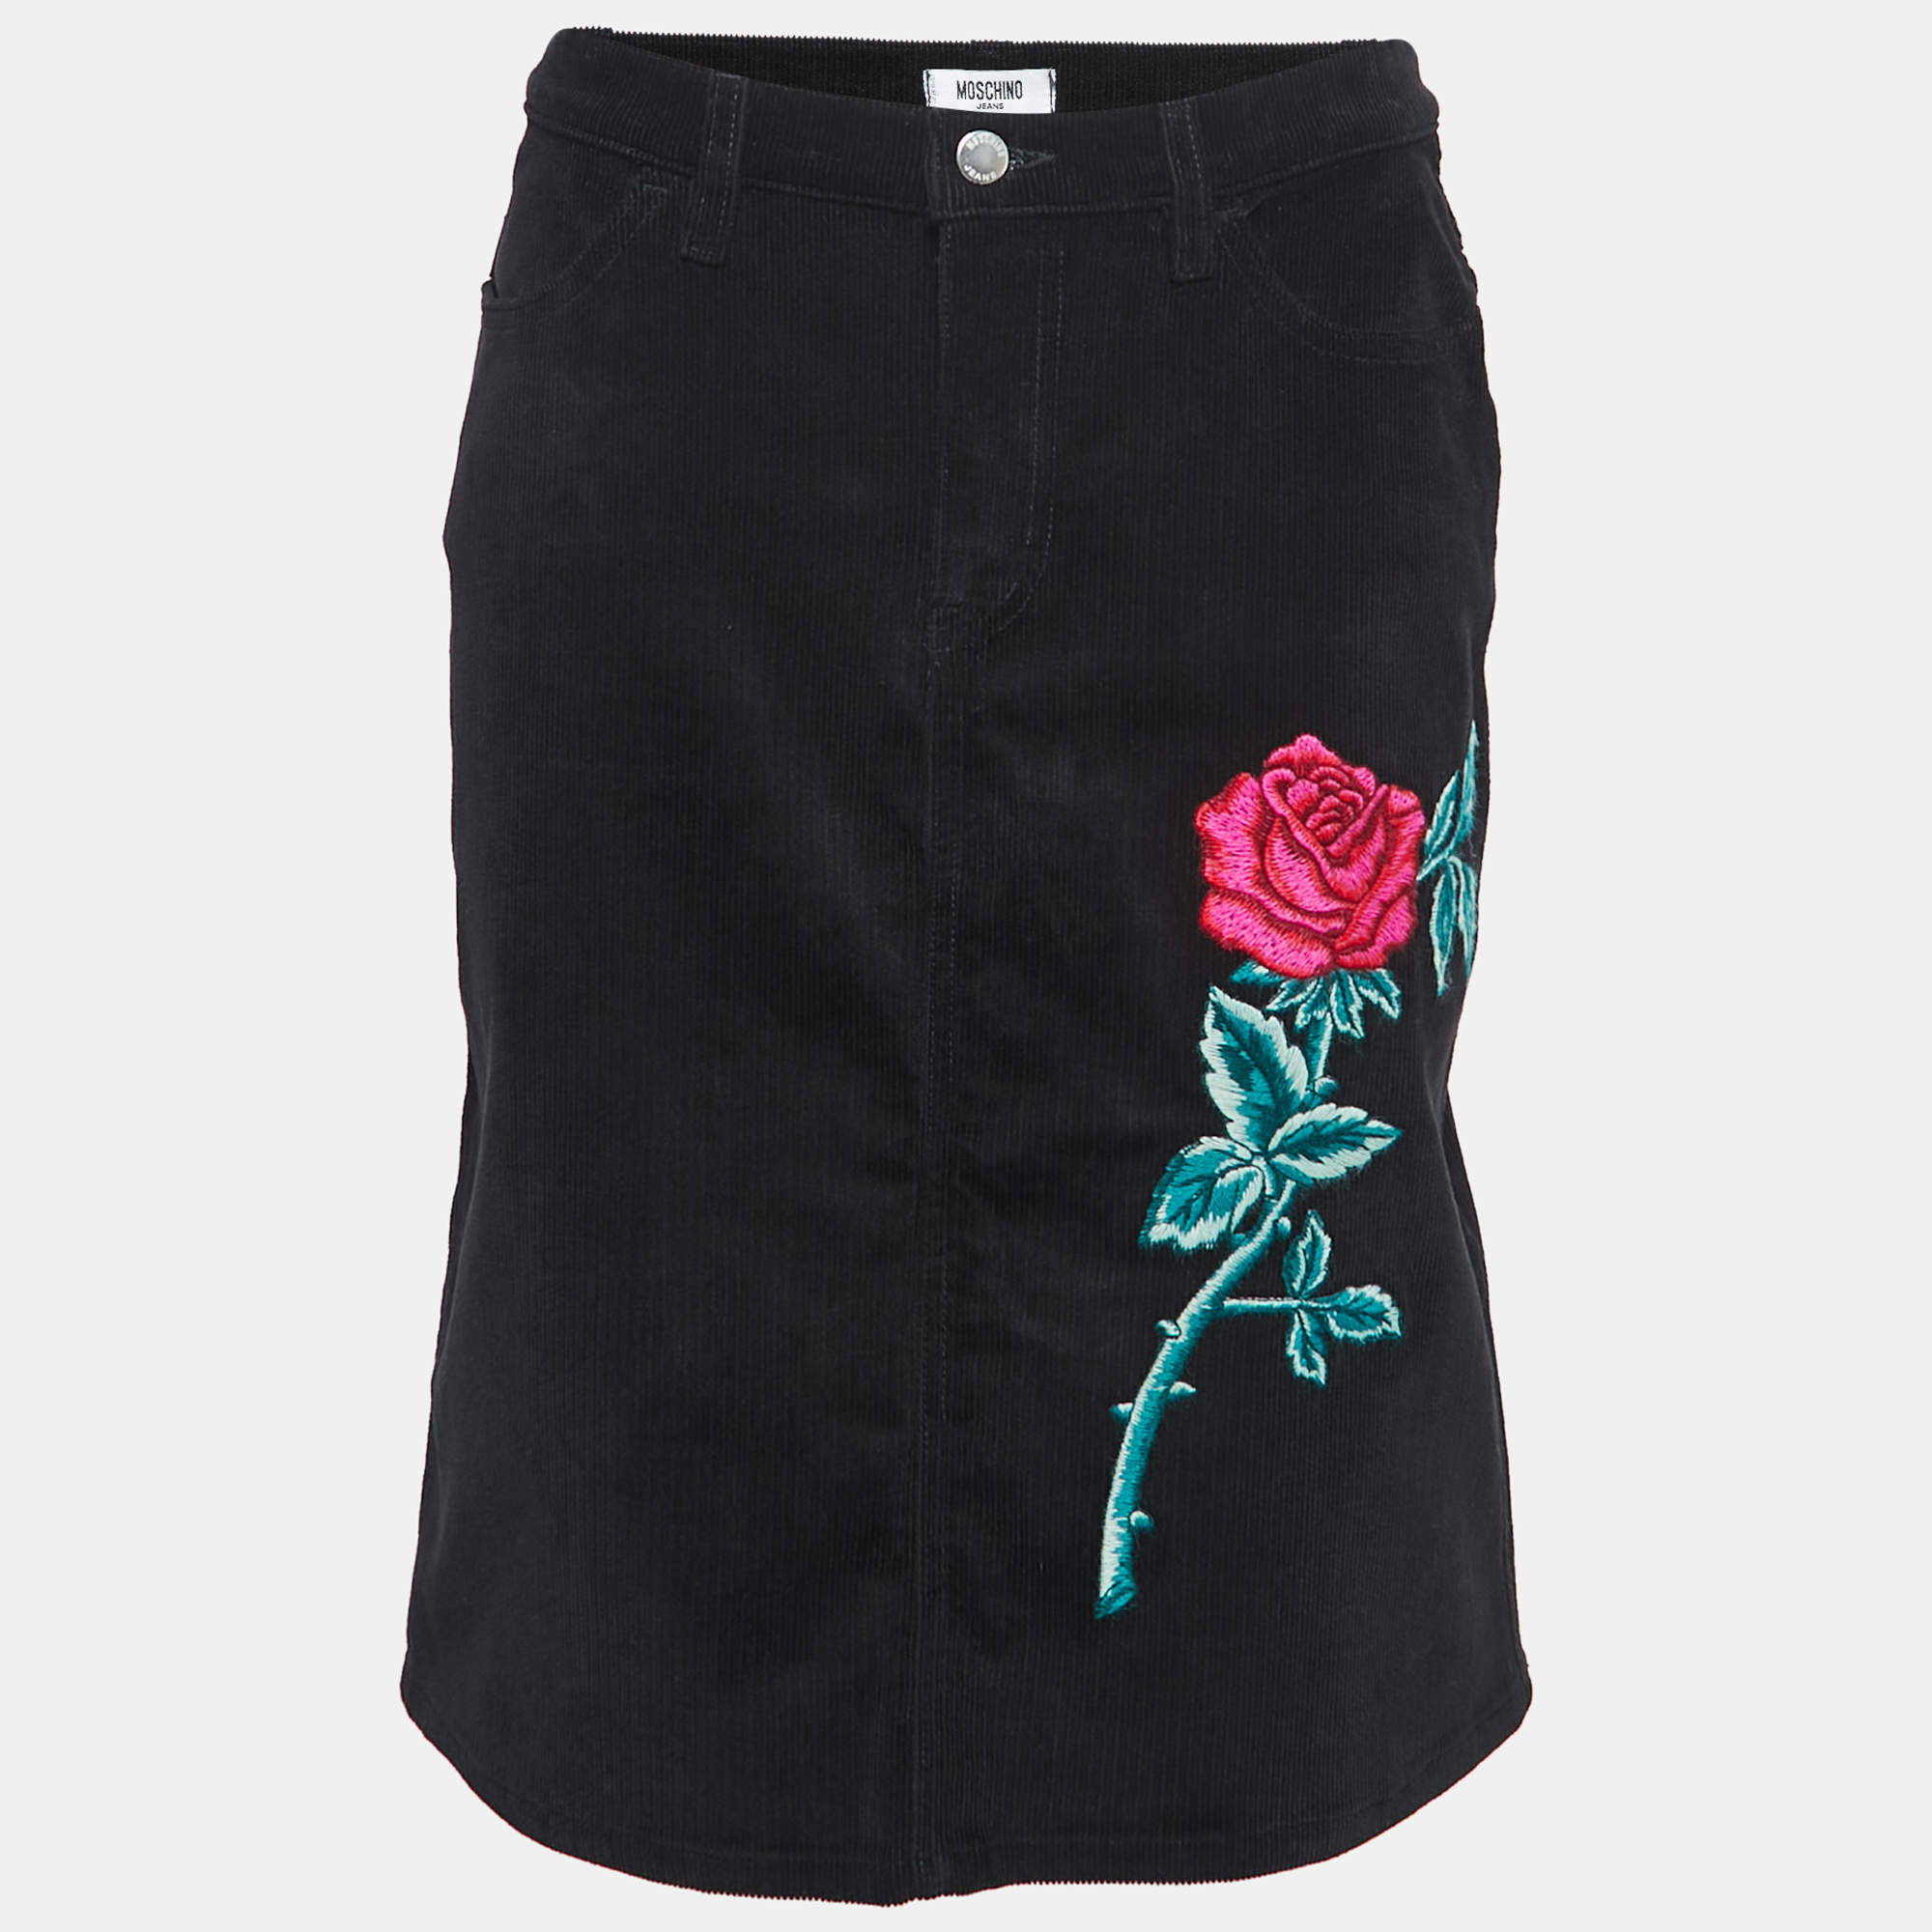 Moschino Jeans Black Flower Embroidered Corduroy Knee Length Skirt M